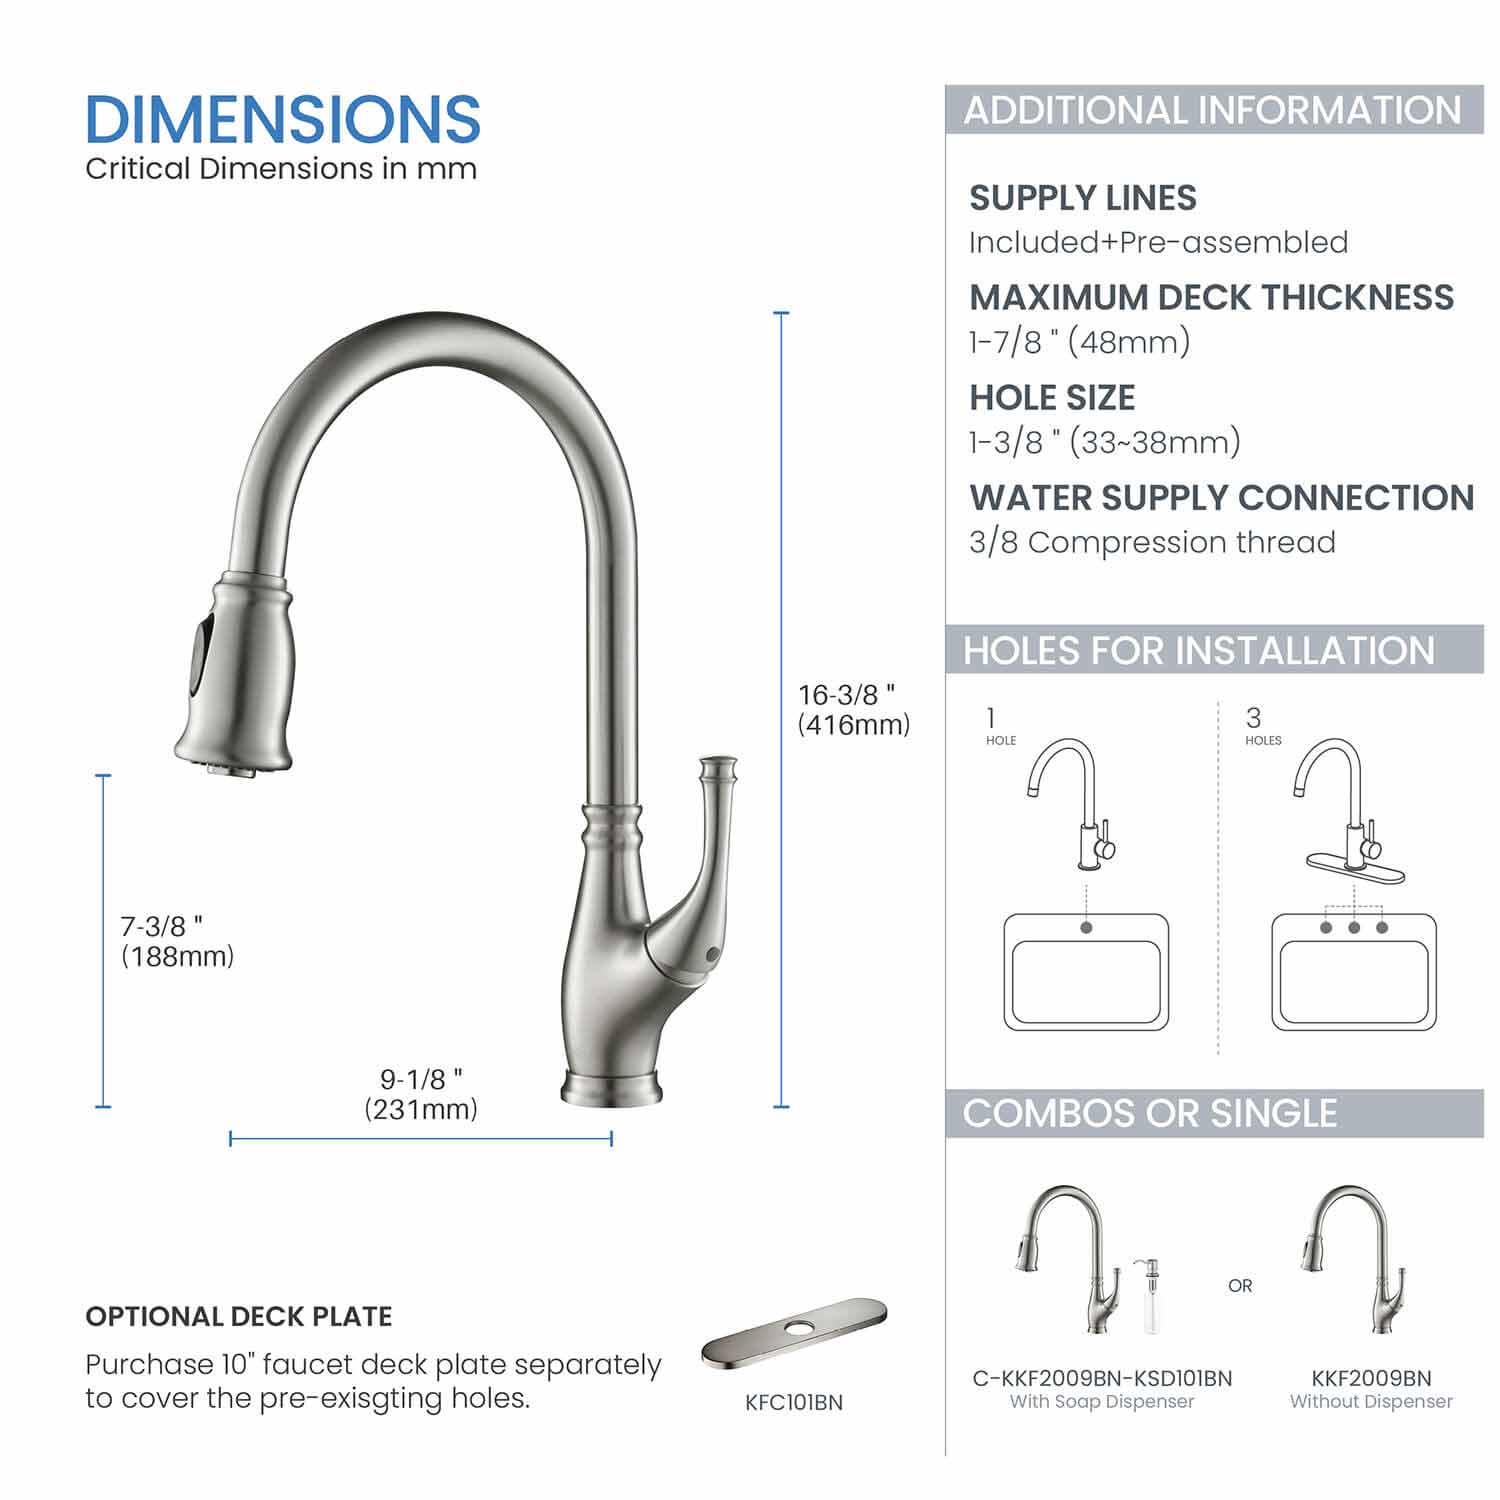 Kibi Summit Single Handle High Arc Pull Down Kitchen Faucet With Soap Dispenser in Brushed Nickel Finish